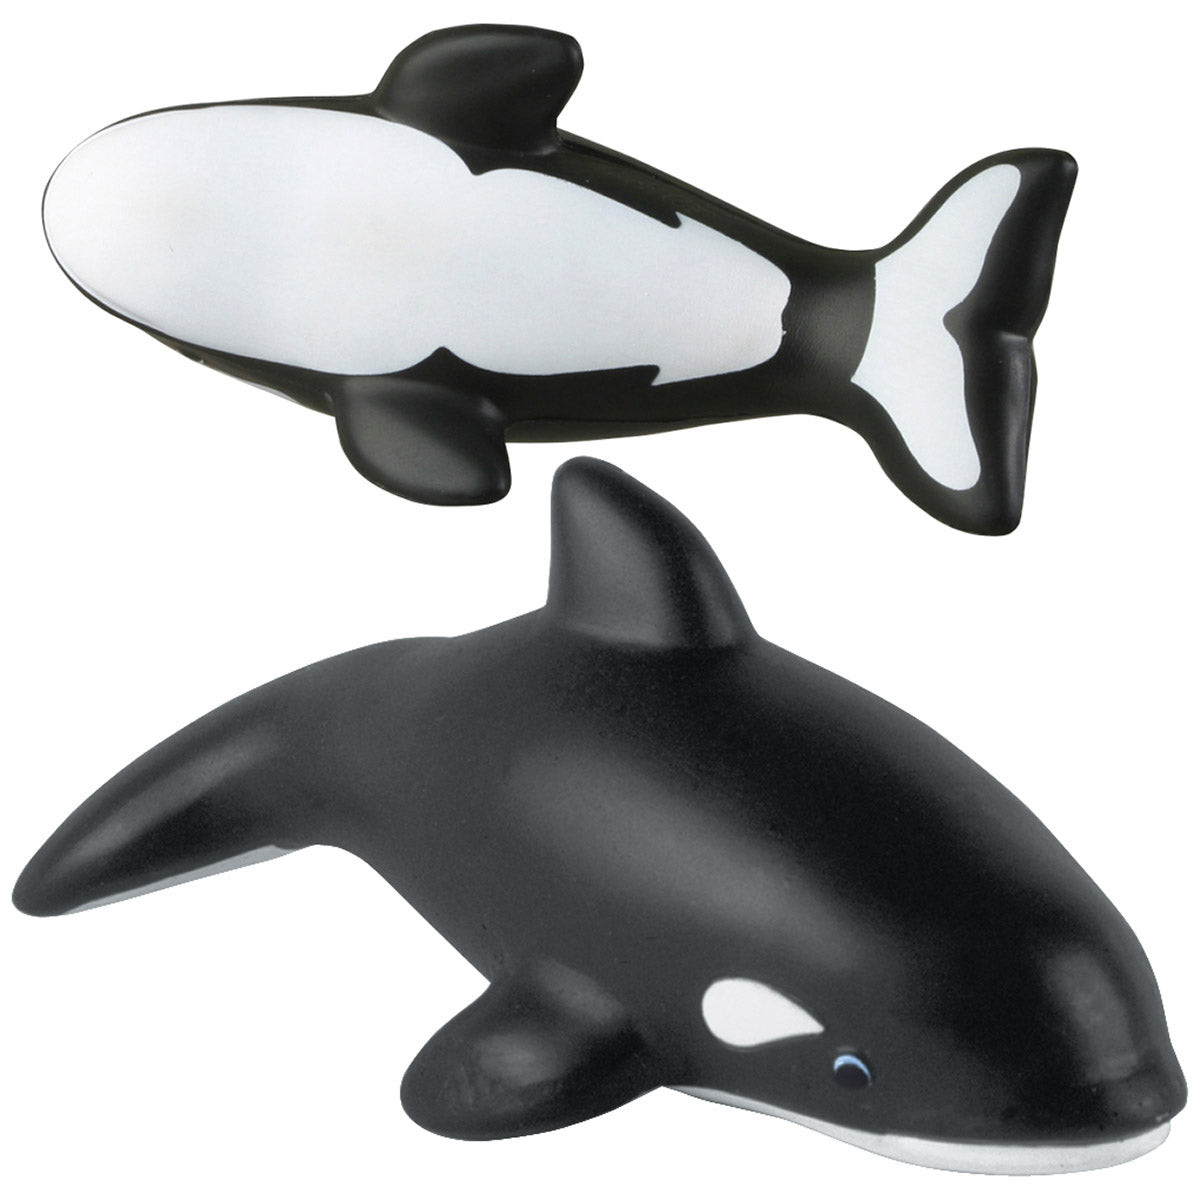 Killer Whale Stress Reliever